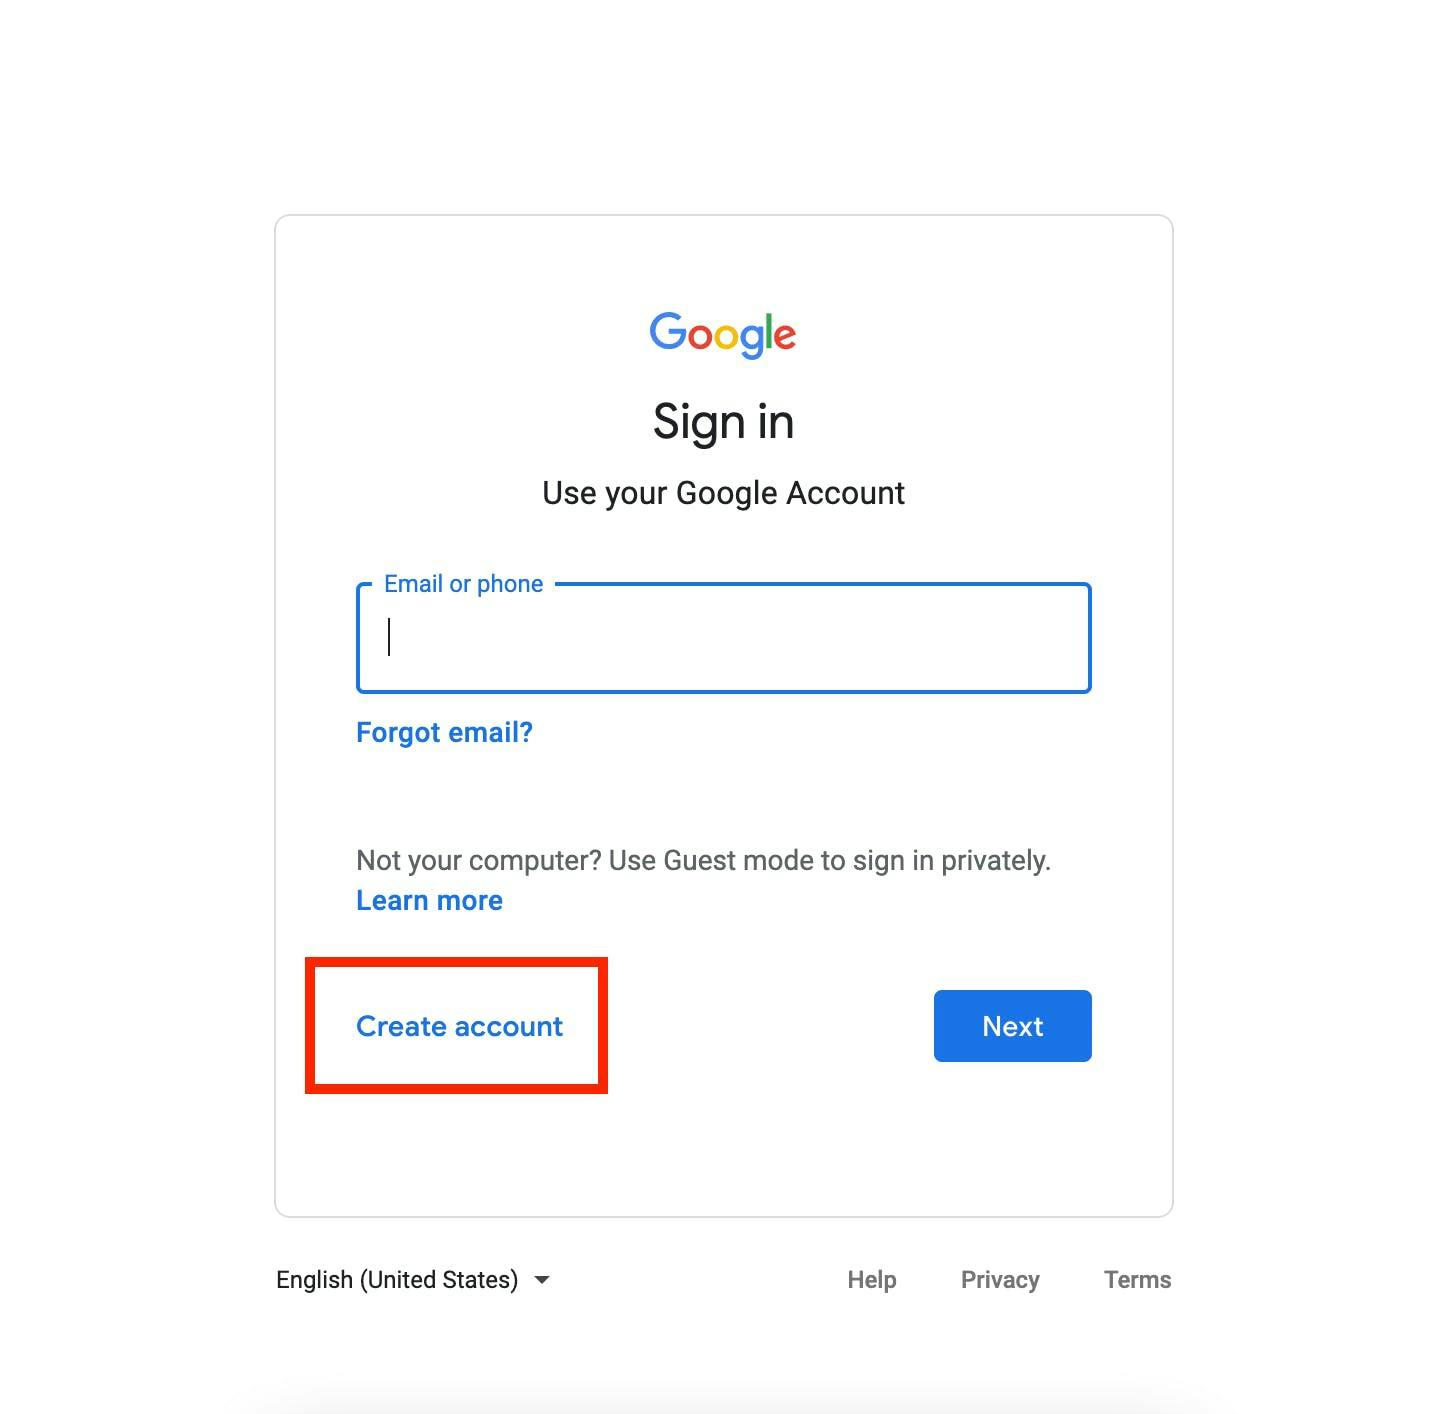 Selecting Create Account from Google